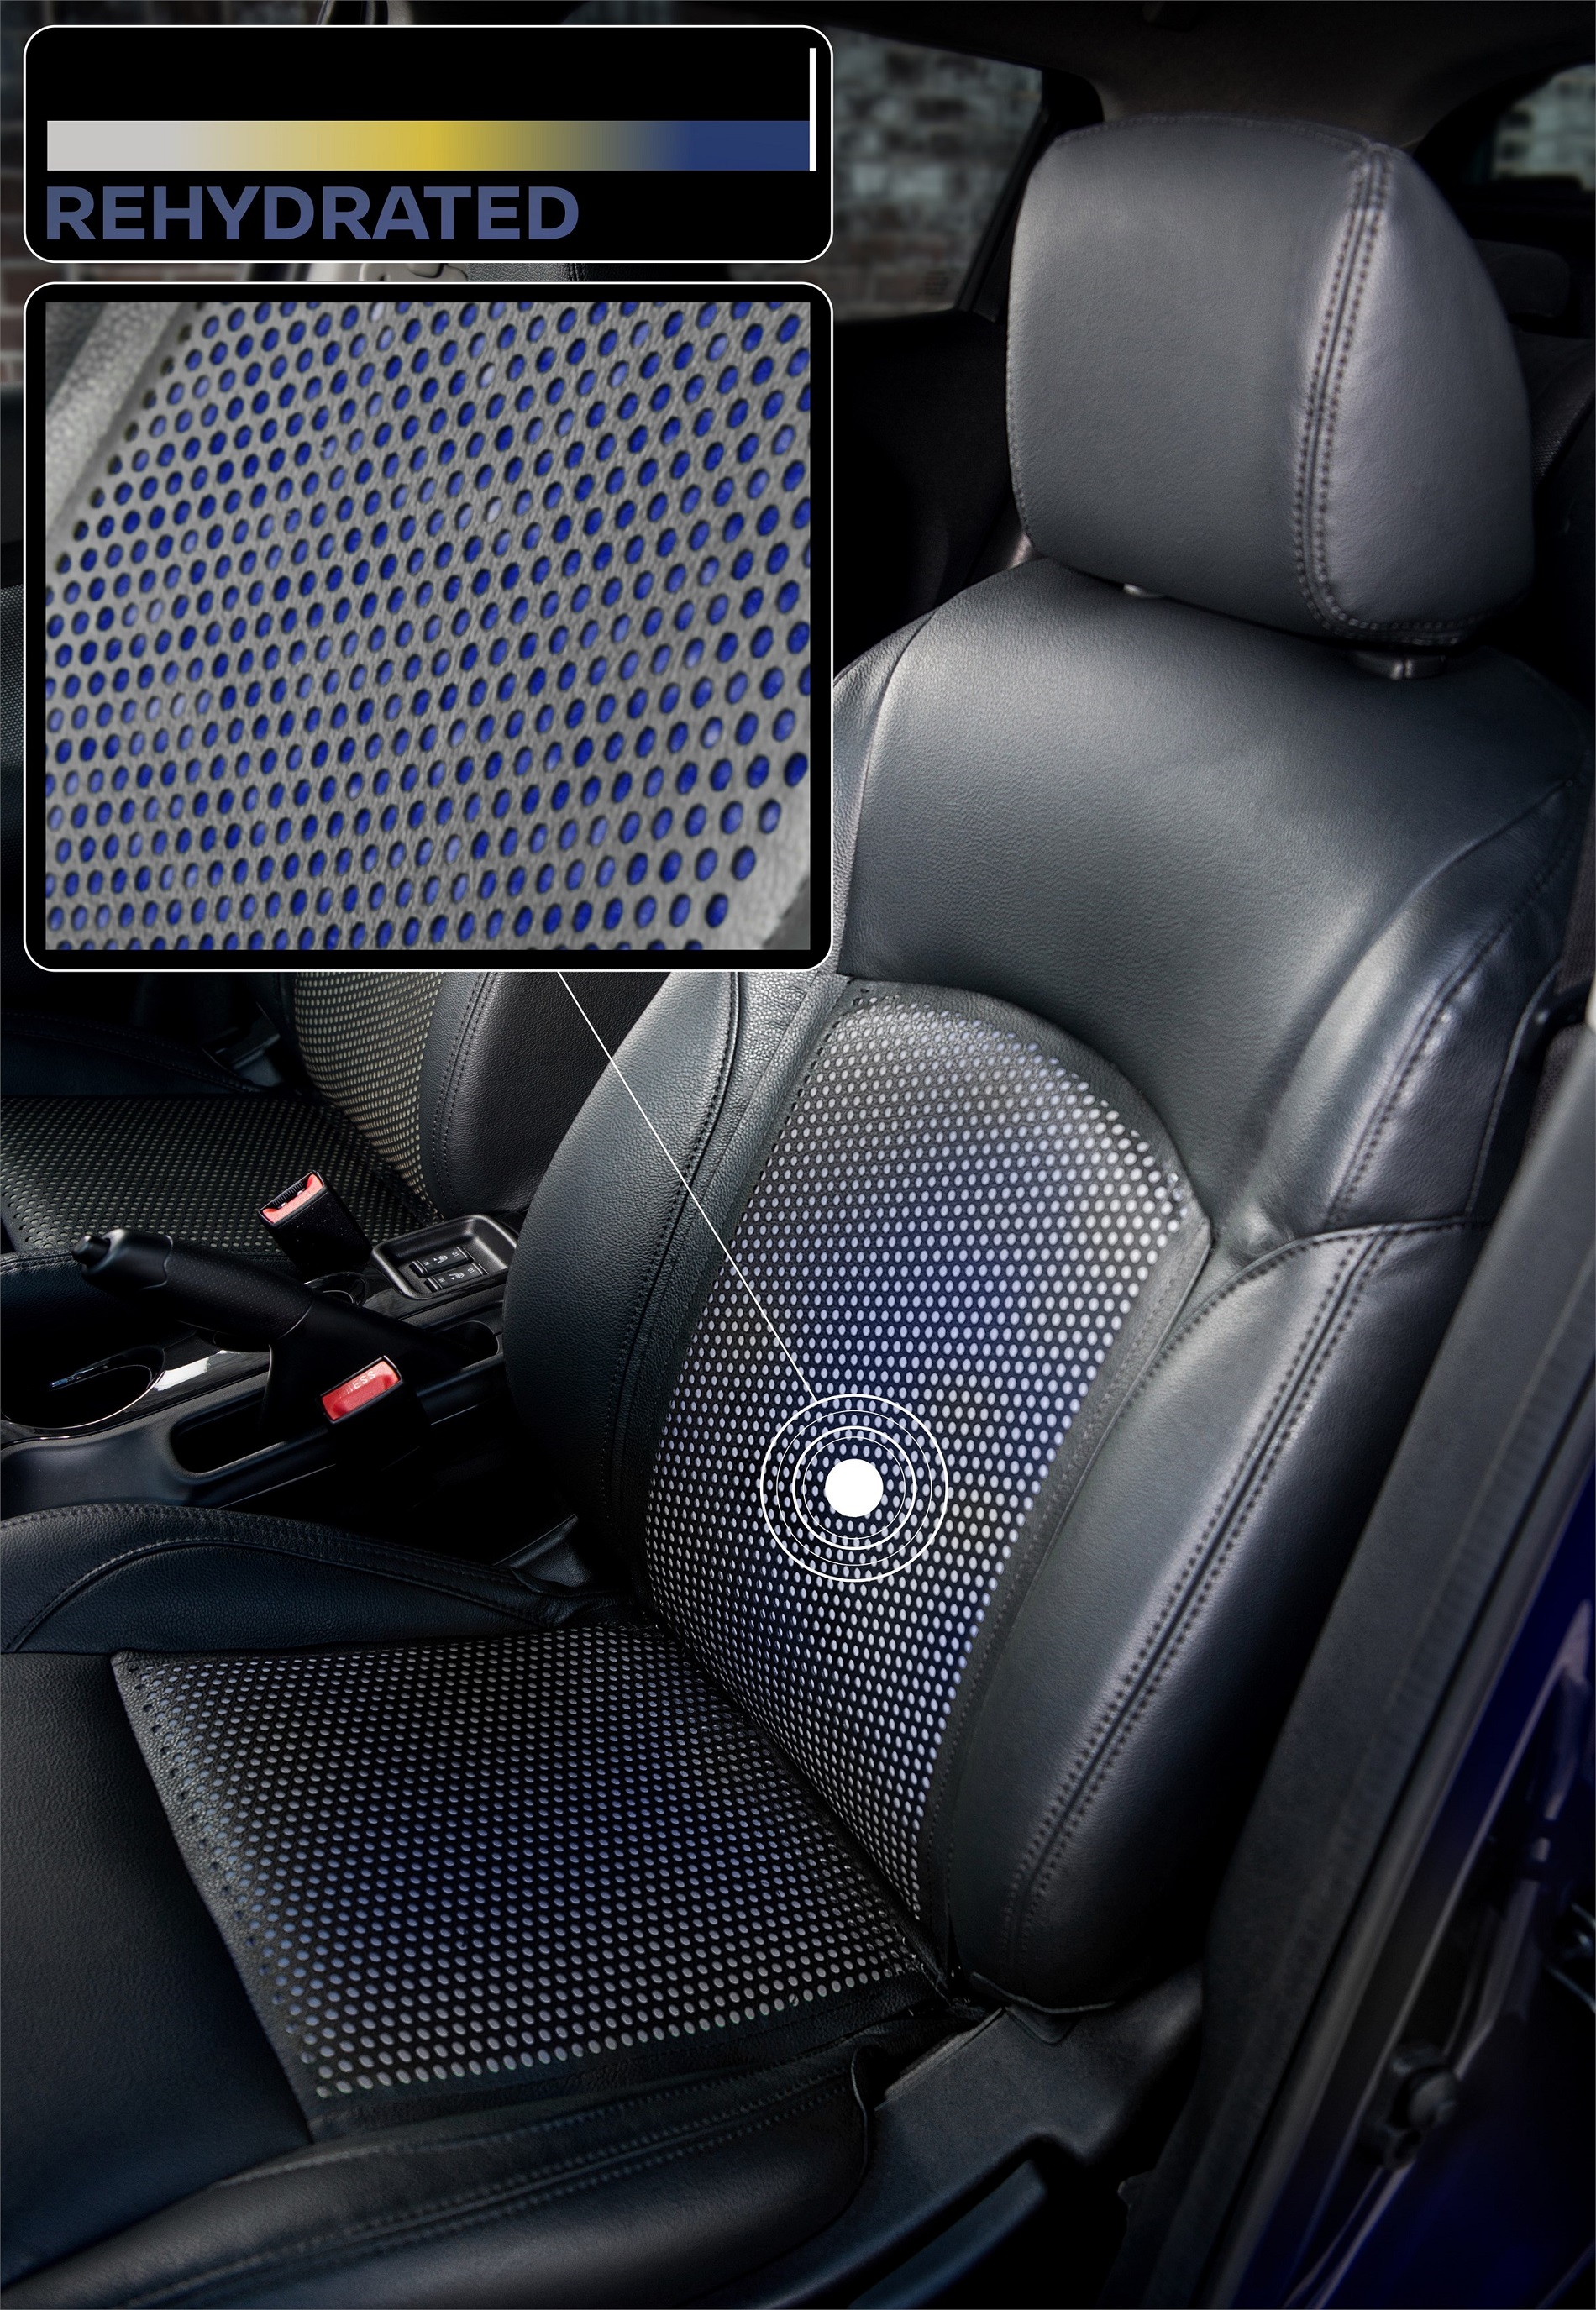 Once the driver is rehydrated, the seat will go blue again (Nissan)